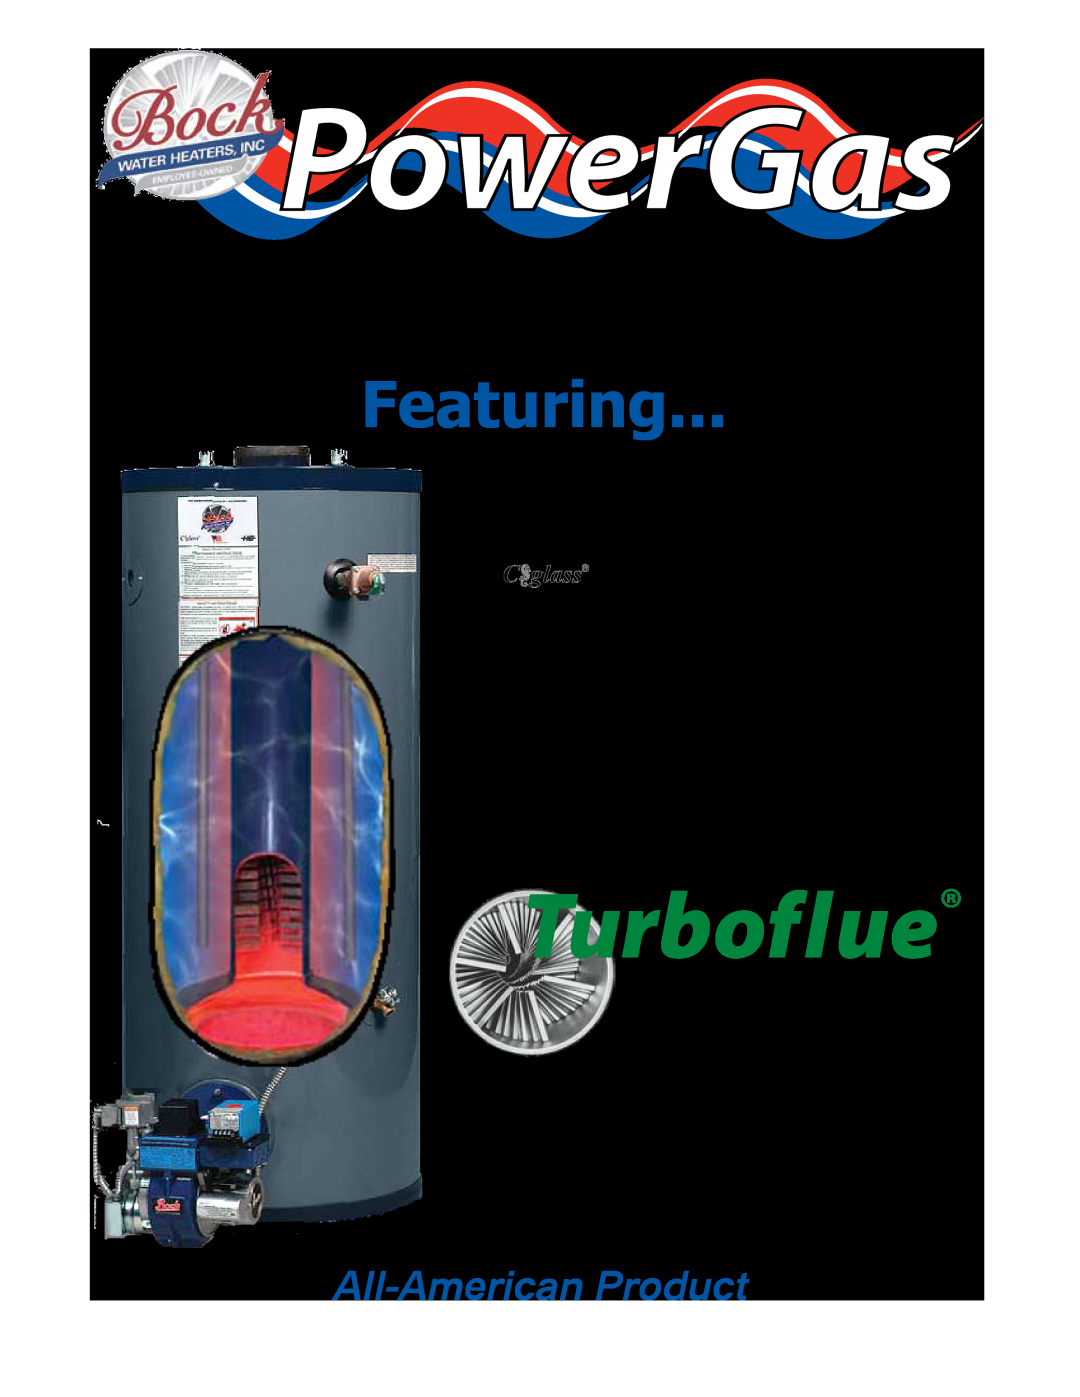 Bock Water heaters Residential Power Gas Water Heater warranty PowerGas, Turboflue, Residential Water Heaters, Featuring 